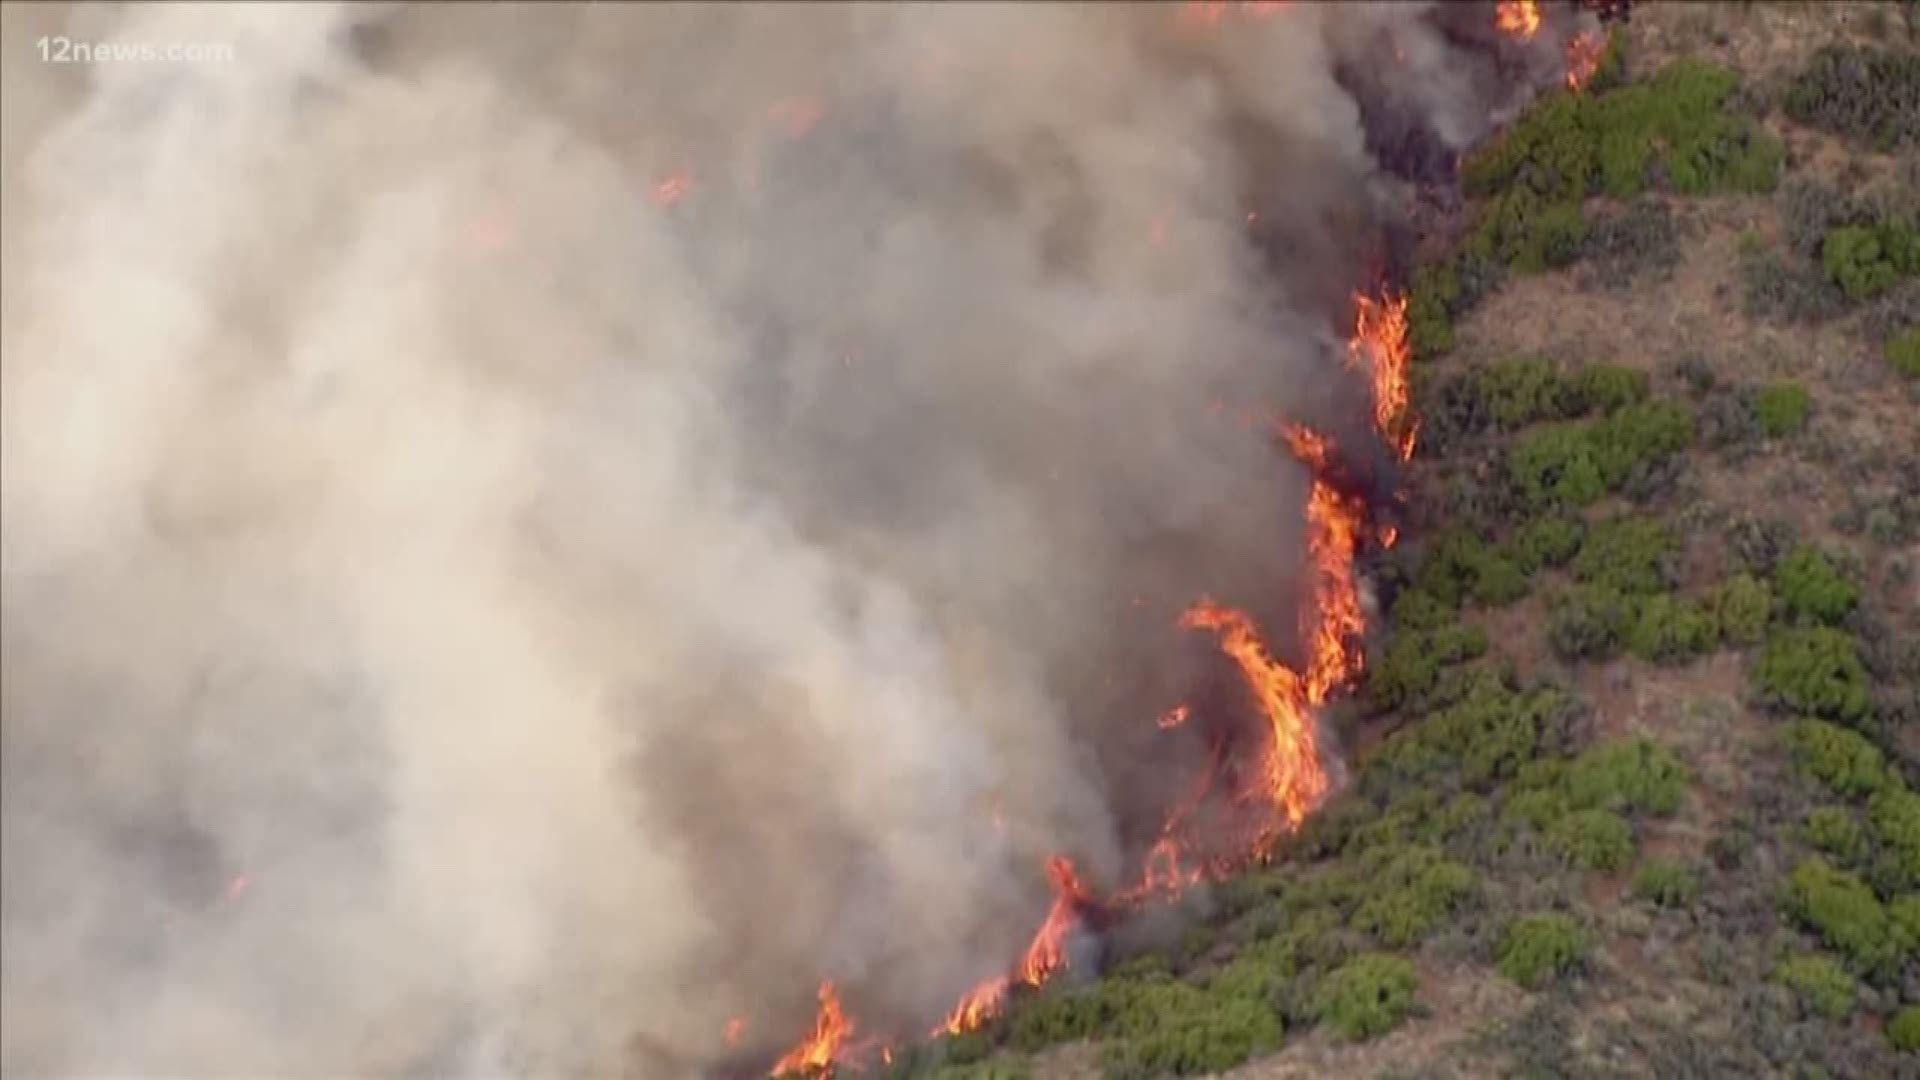 The Woodbury Fire burning in the Superstition Mountains is about 11 miles north of Gold Canyon. It has burned more than 10,000 acres and is zero percent contained.